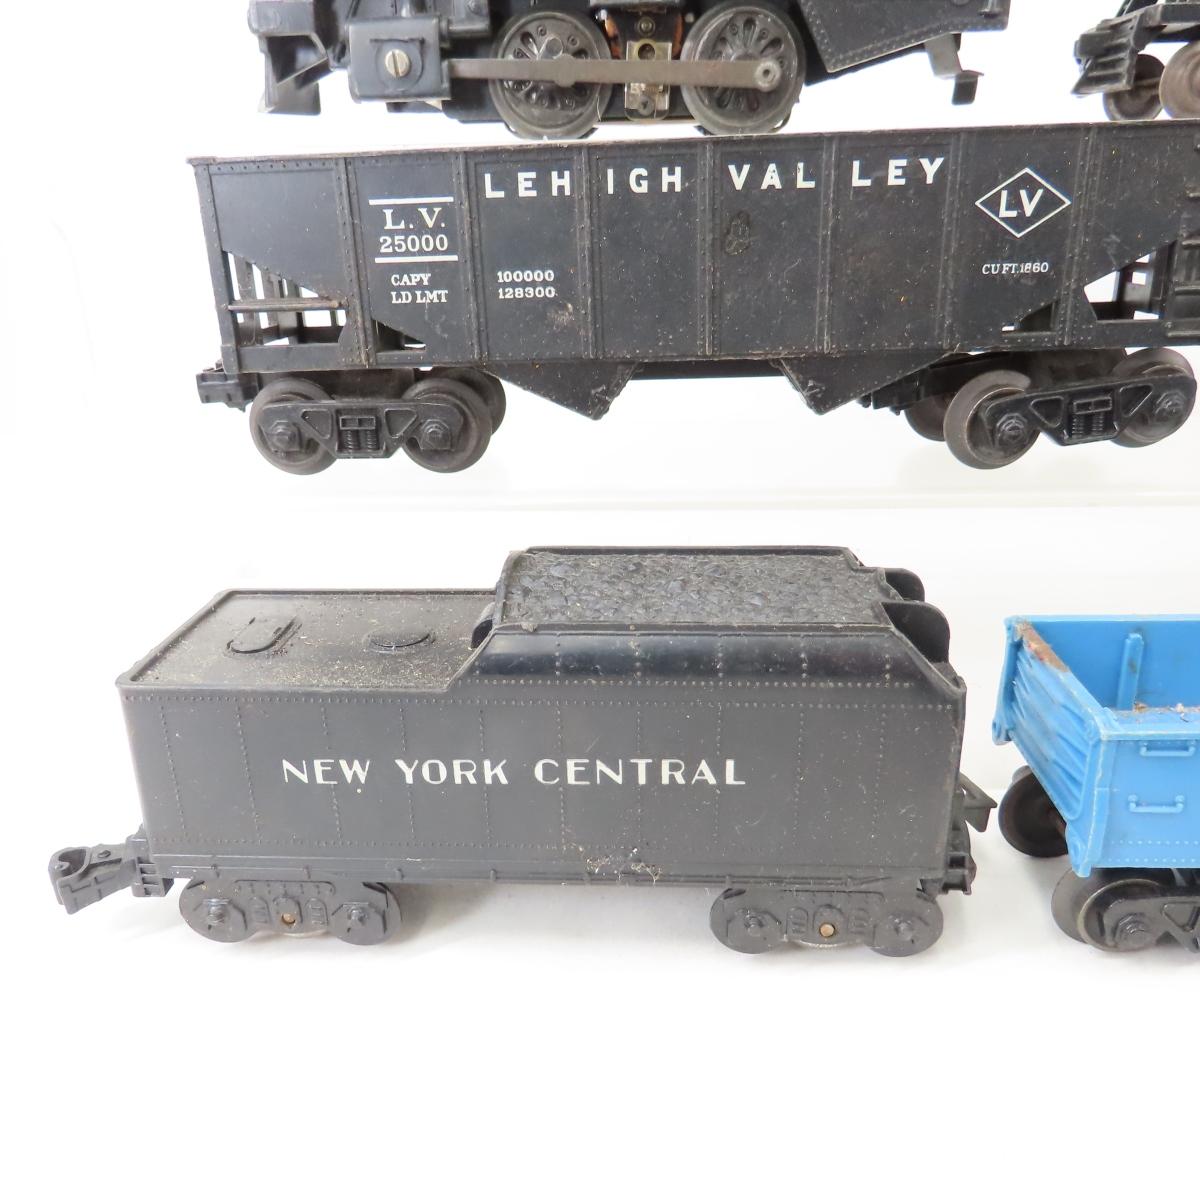 Lionel 1061 &400 engines, other cars and more